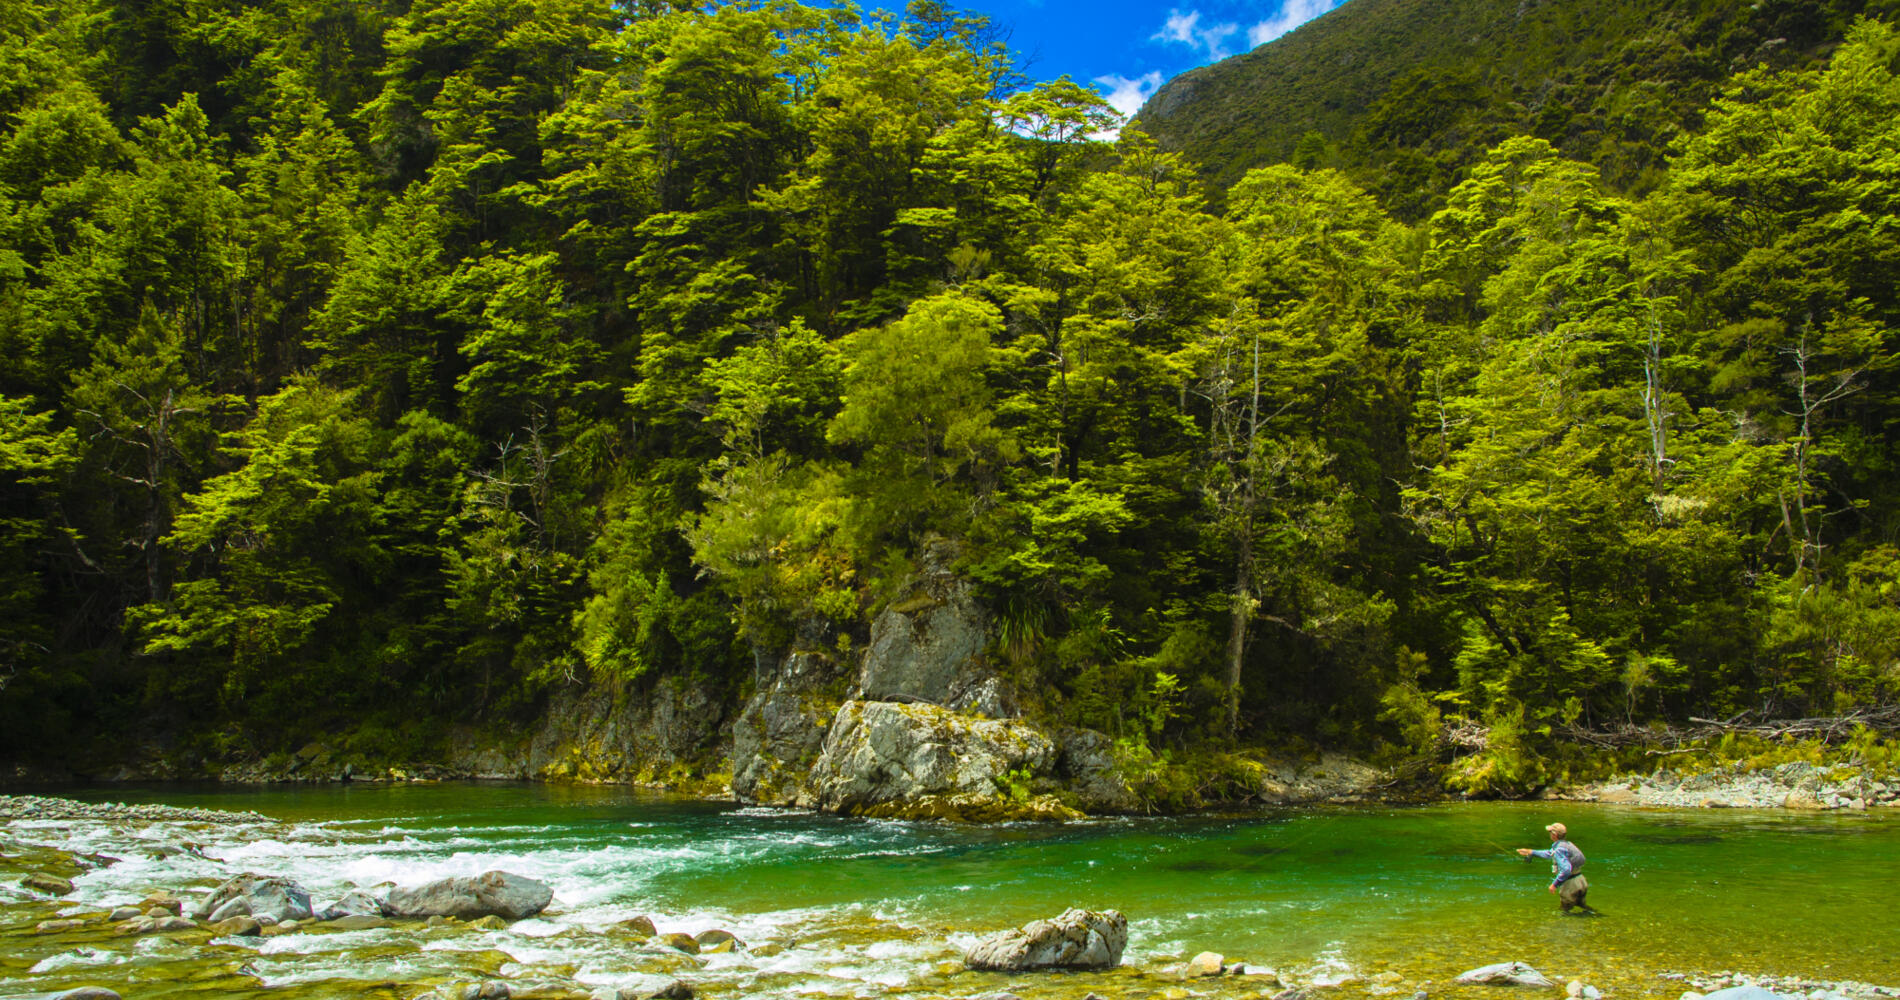 Preparing for your New Zealand fly fishing trip